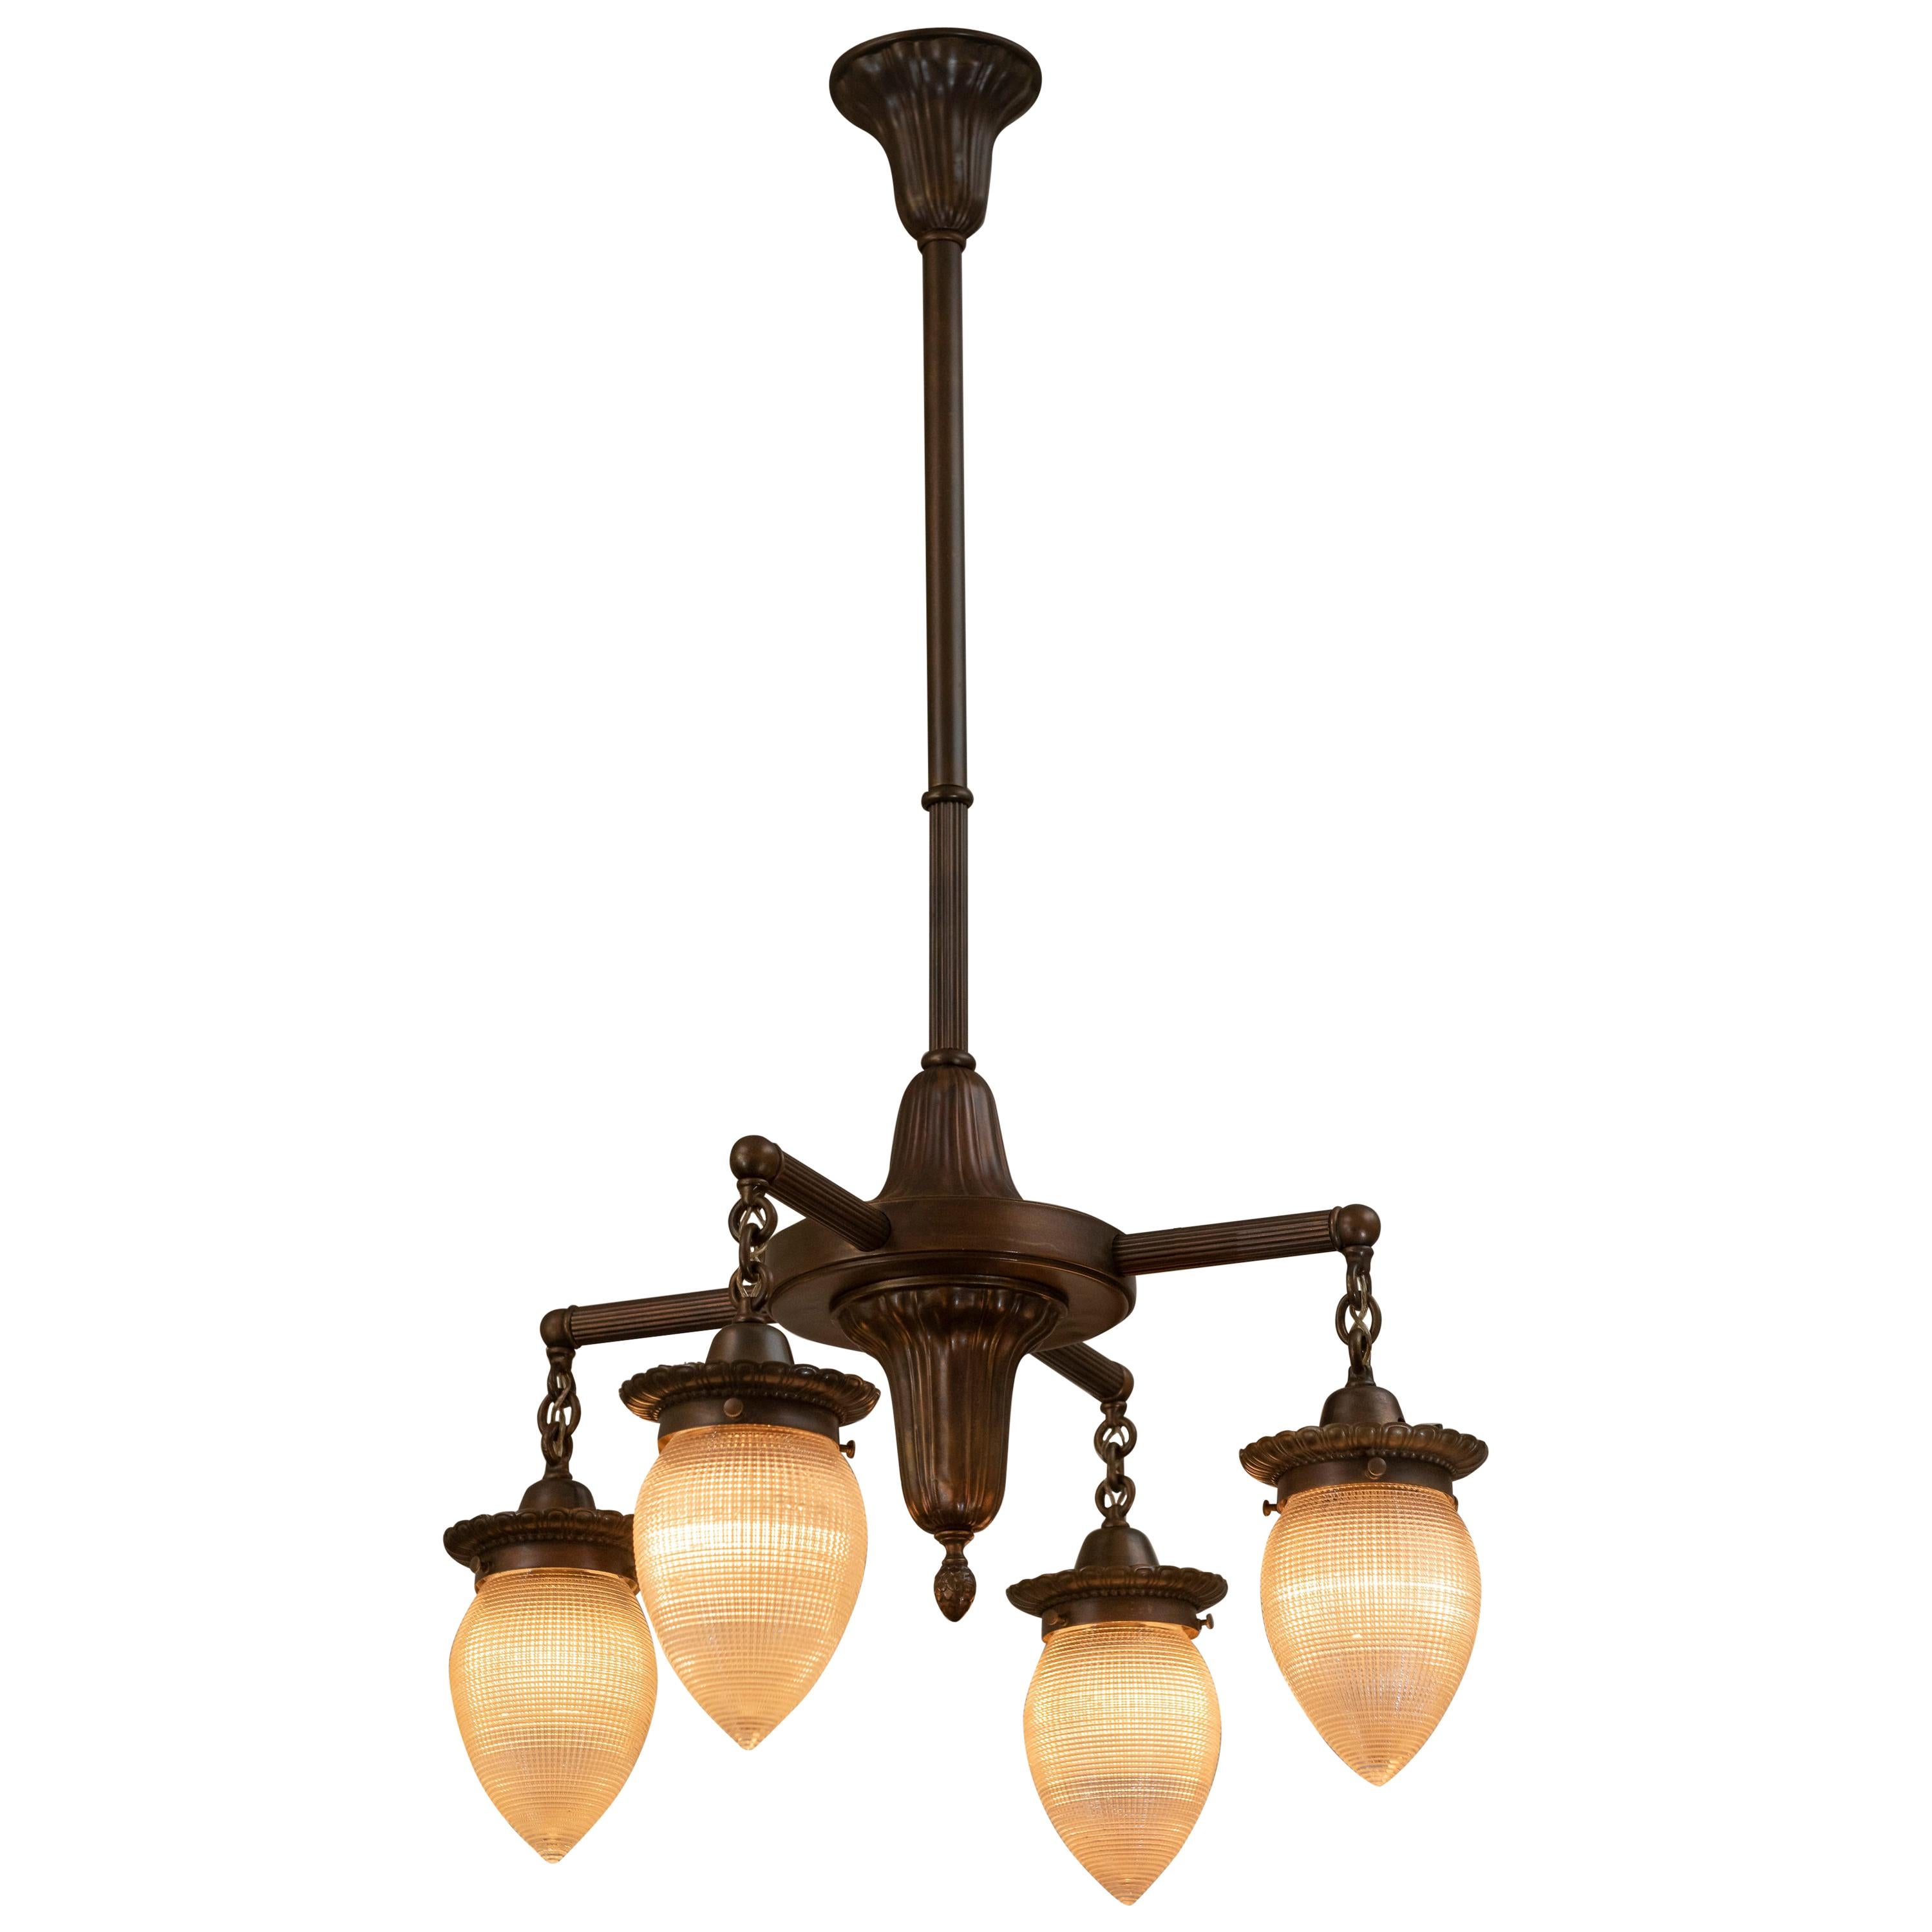 Edwardian or Industrial 4-Arm Chandelier with 4 Holophane Torpedo Shades